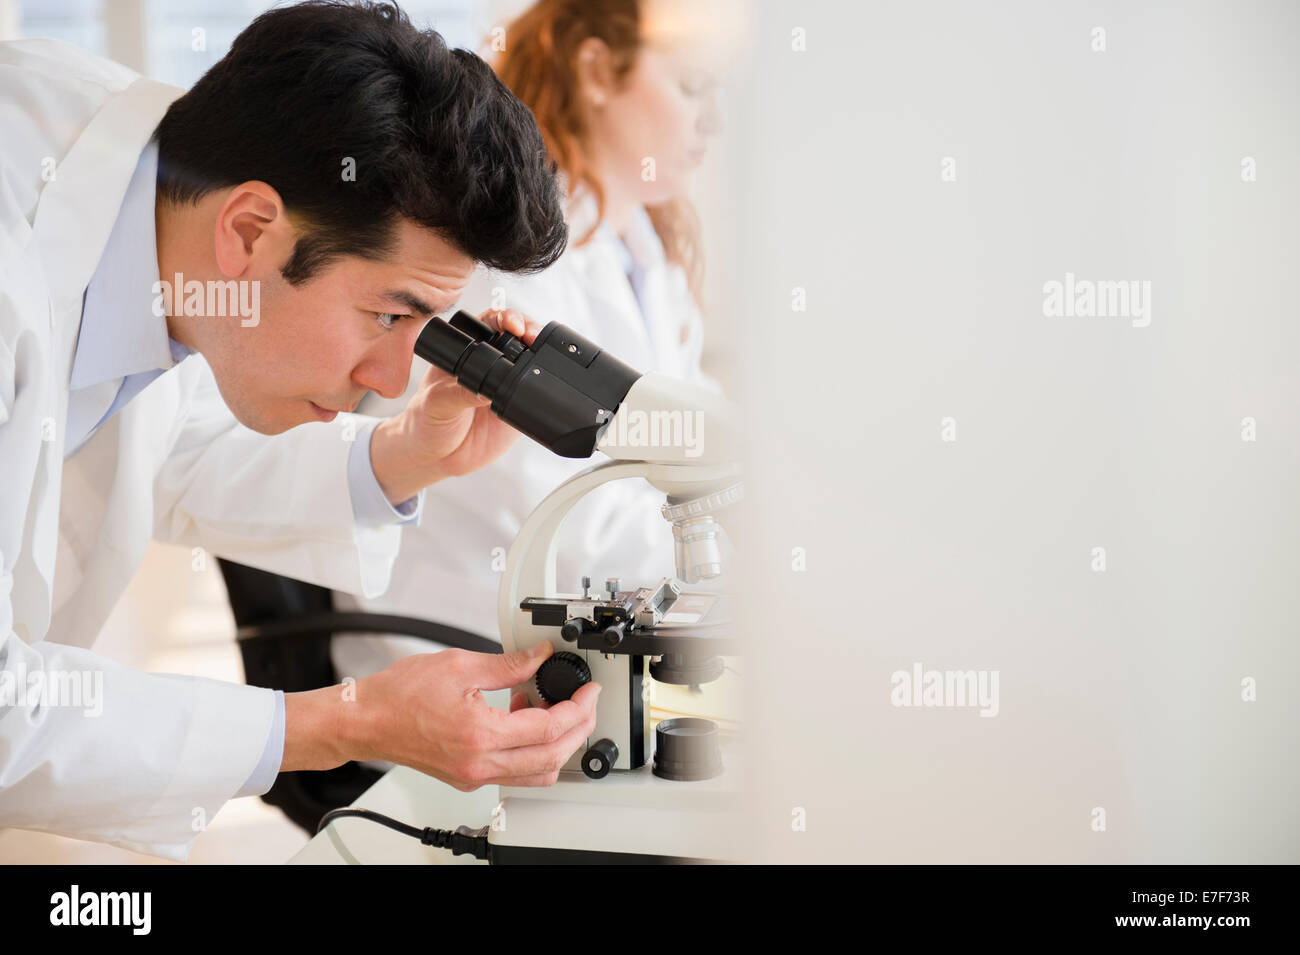 Scientist using microscope in lab Banque D'Images